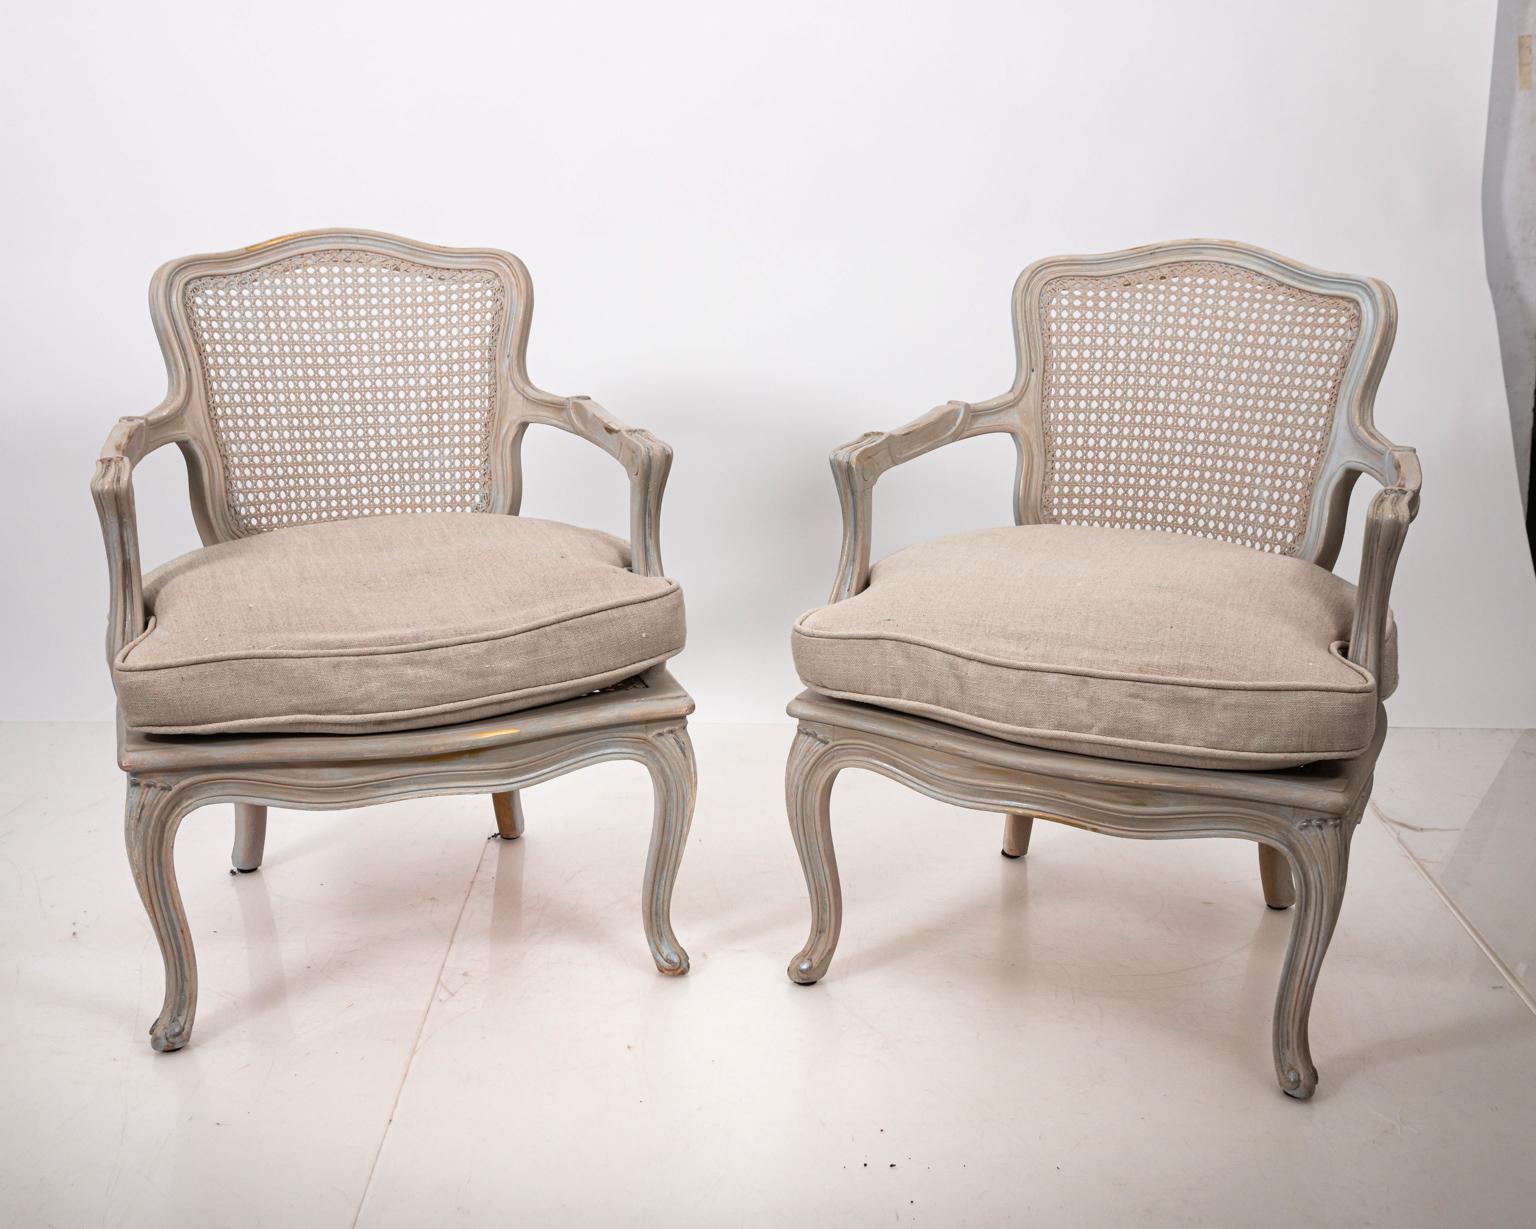 Pair of Louis XV style painted white/grey cane back armchairs with slight gold accent, circa 1960s. The chairs are also newly upholstered with either linen or cotton fabric down cushion. Please note of wear consistent with age. Made in France.